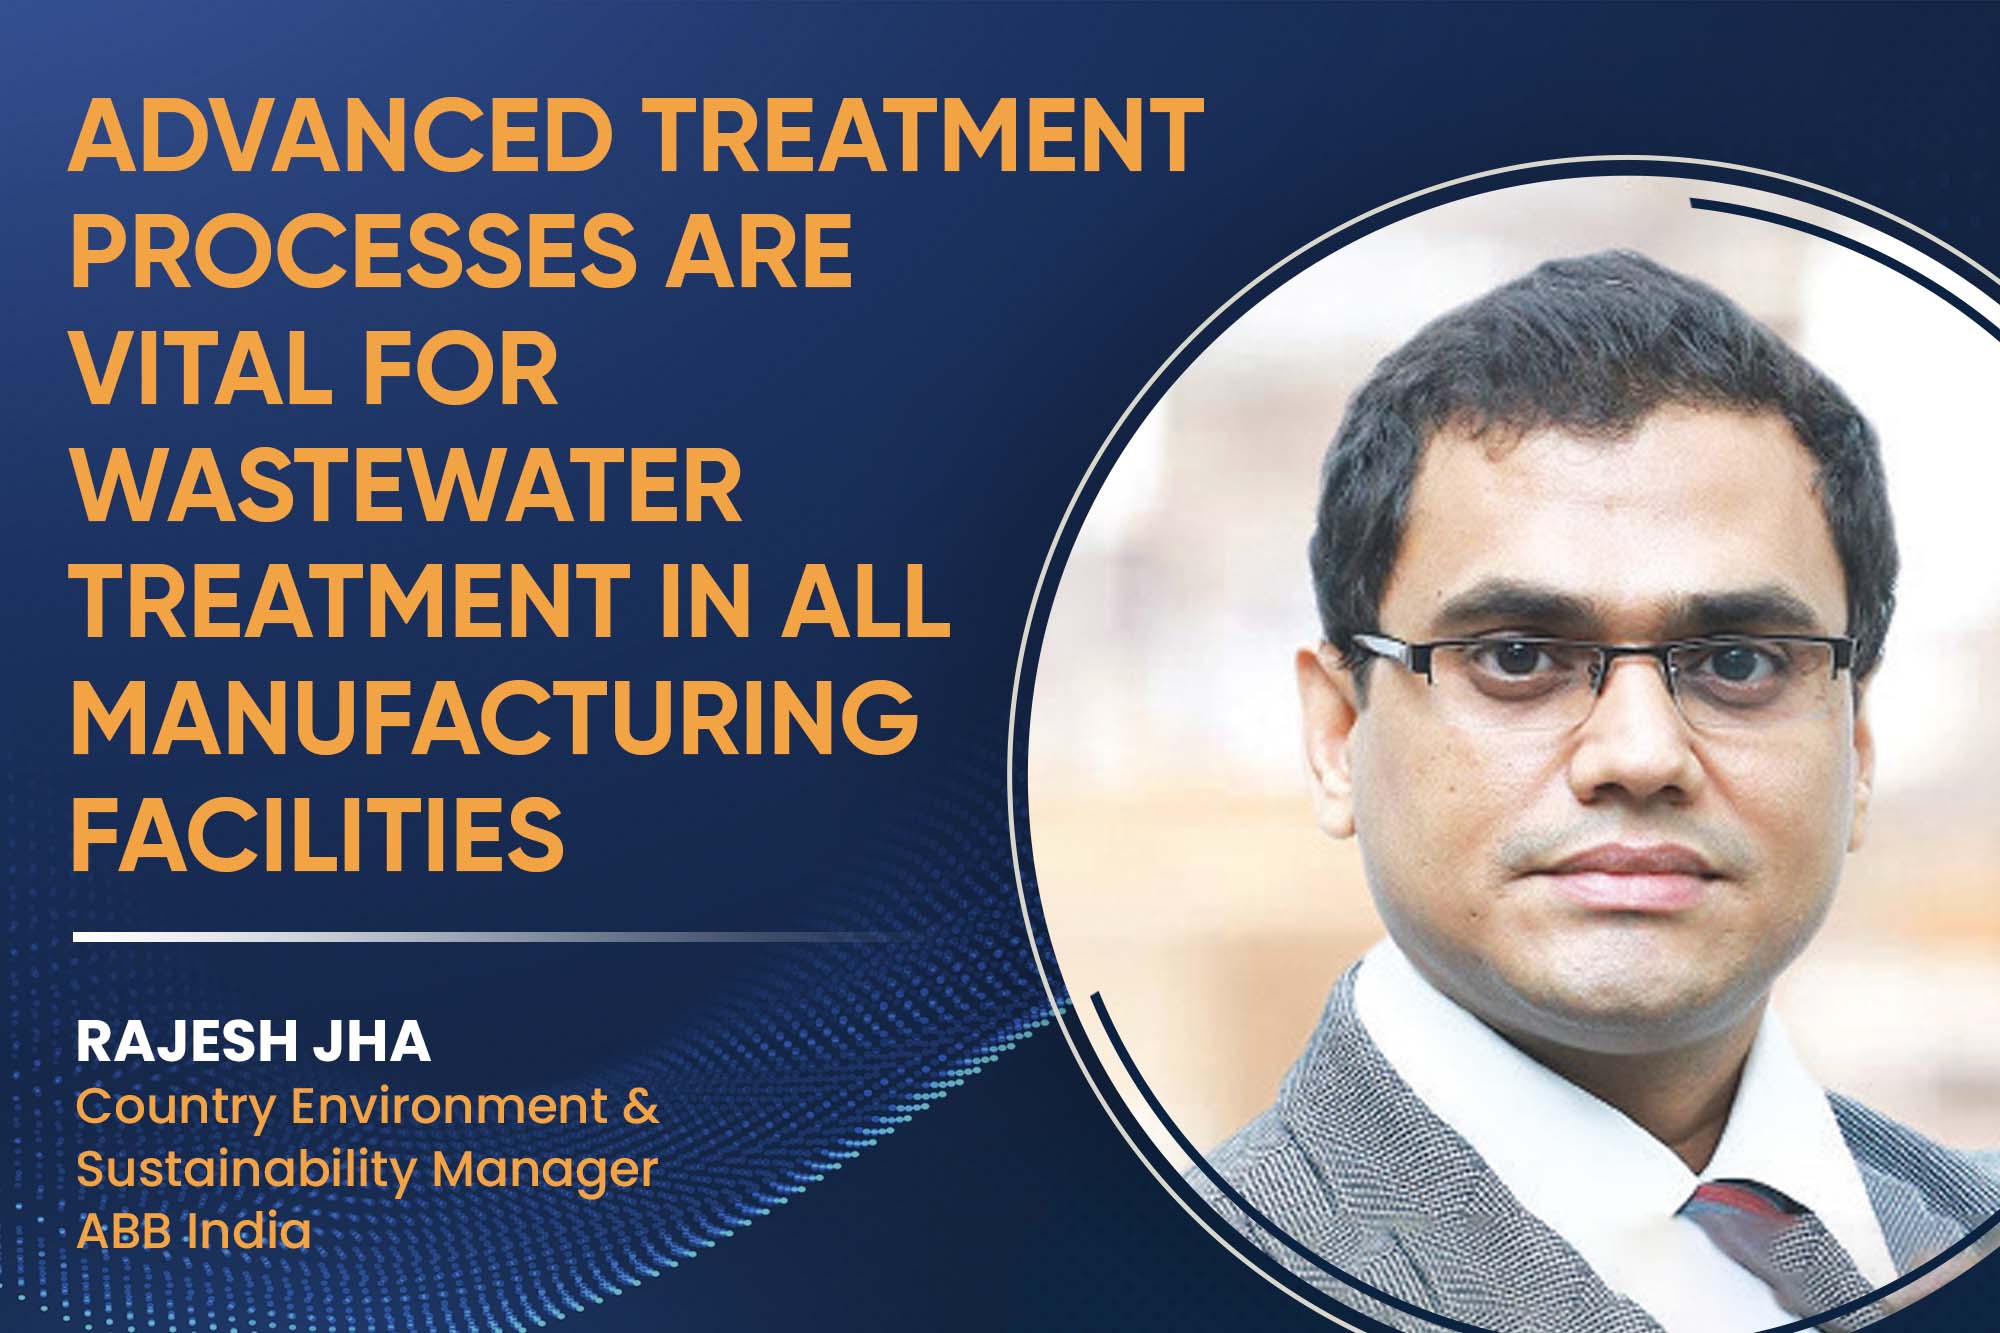 Advanced treatment processes are vital for wastewater treatment in all manufacturing facilities